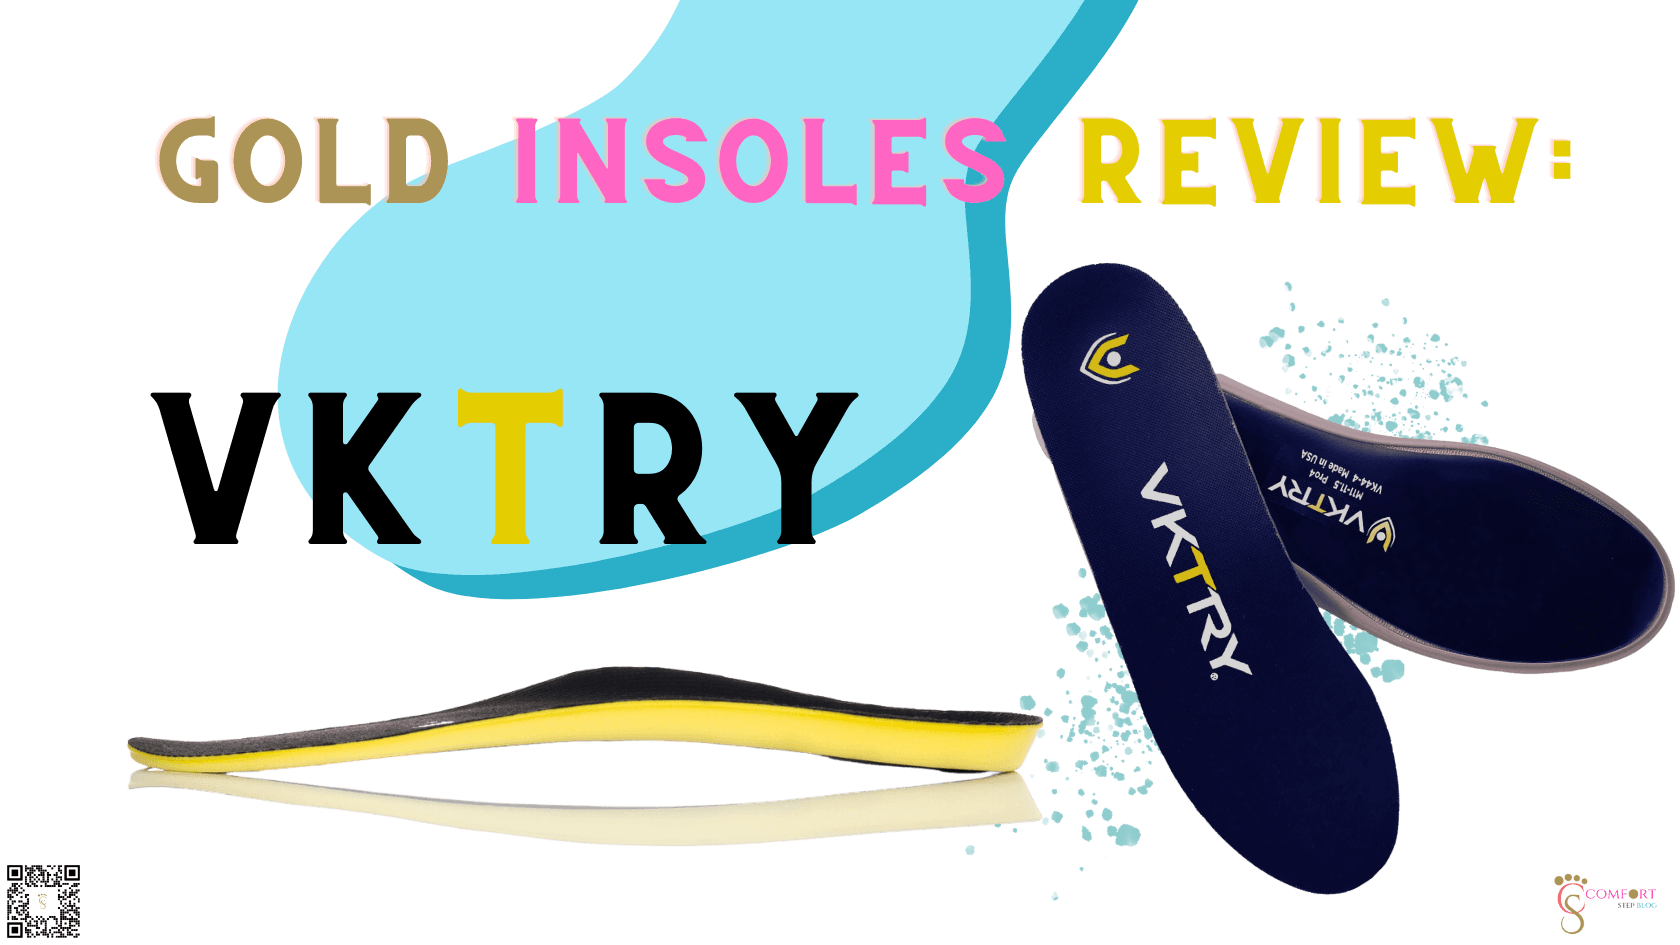 VKTRY Gold Insoles Review